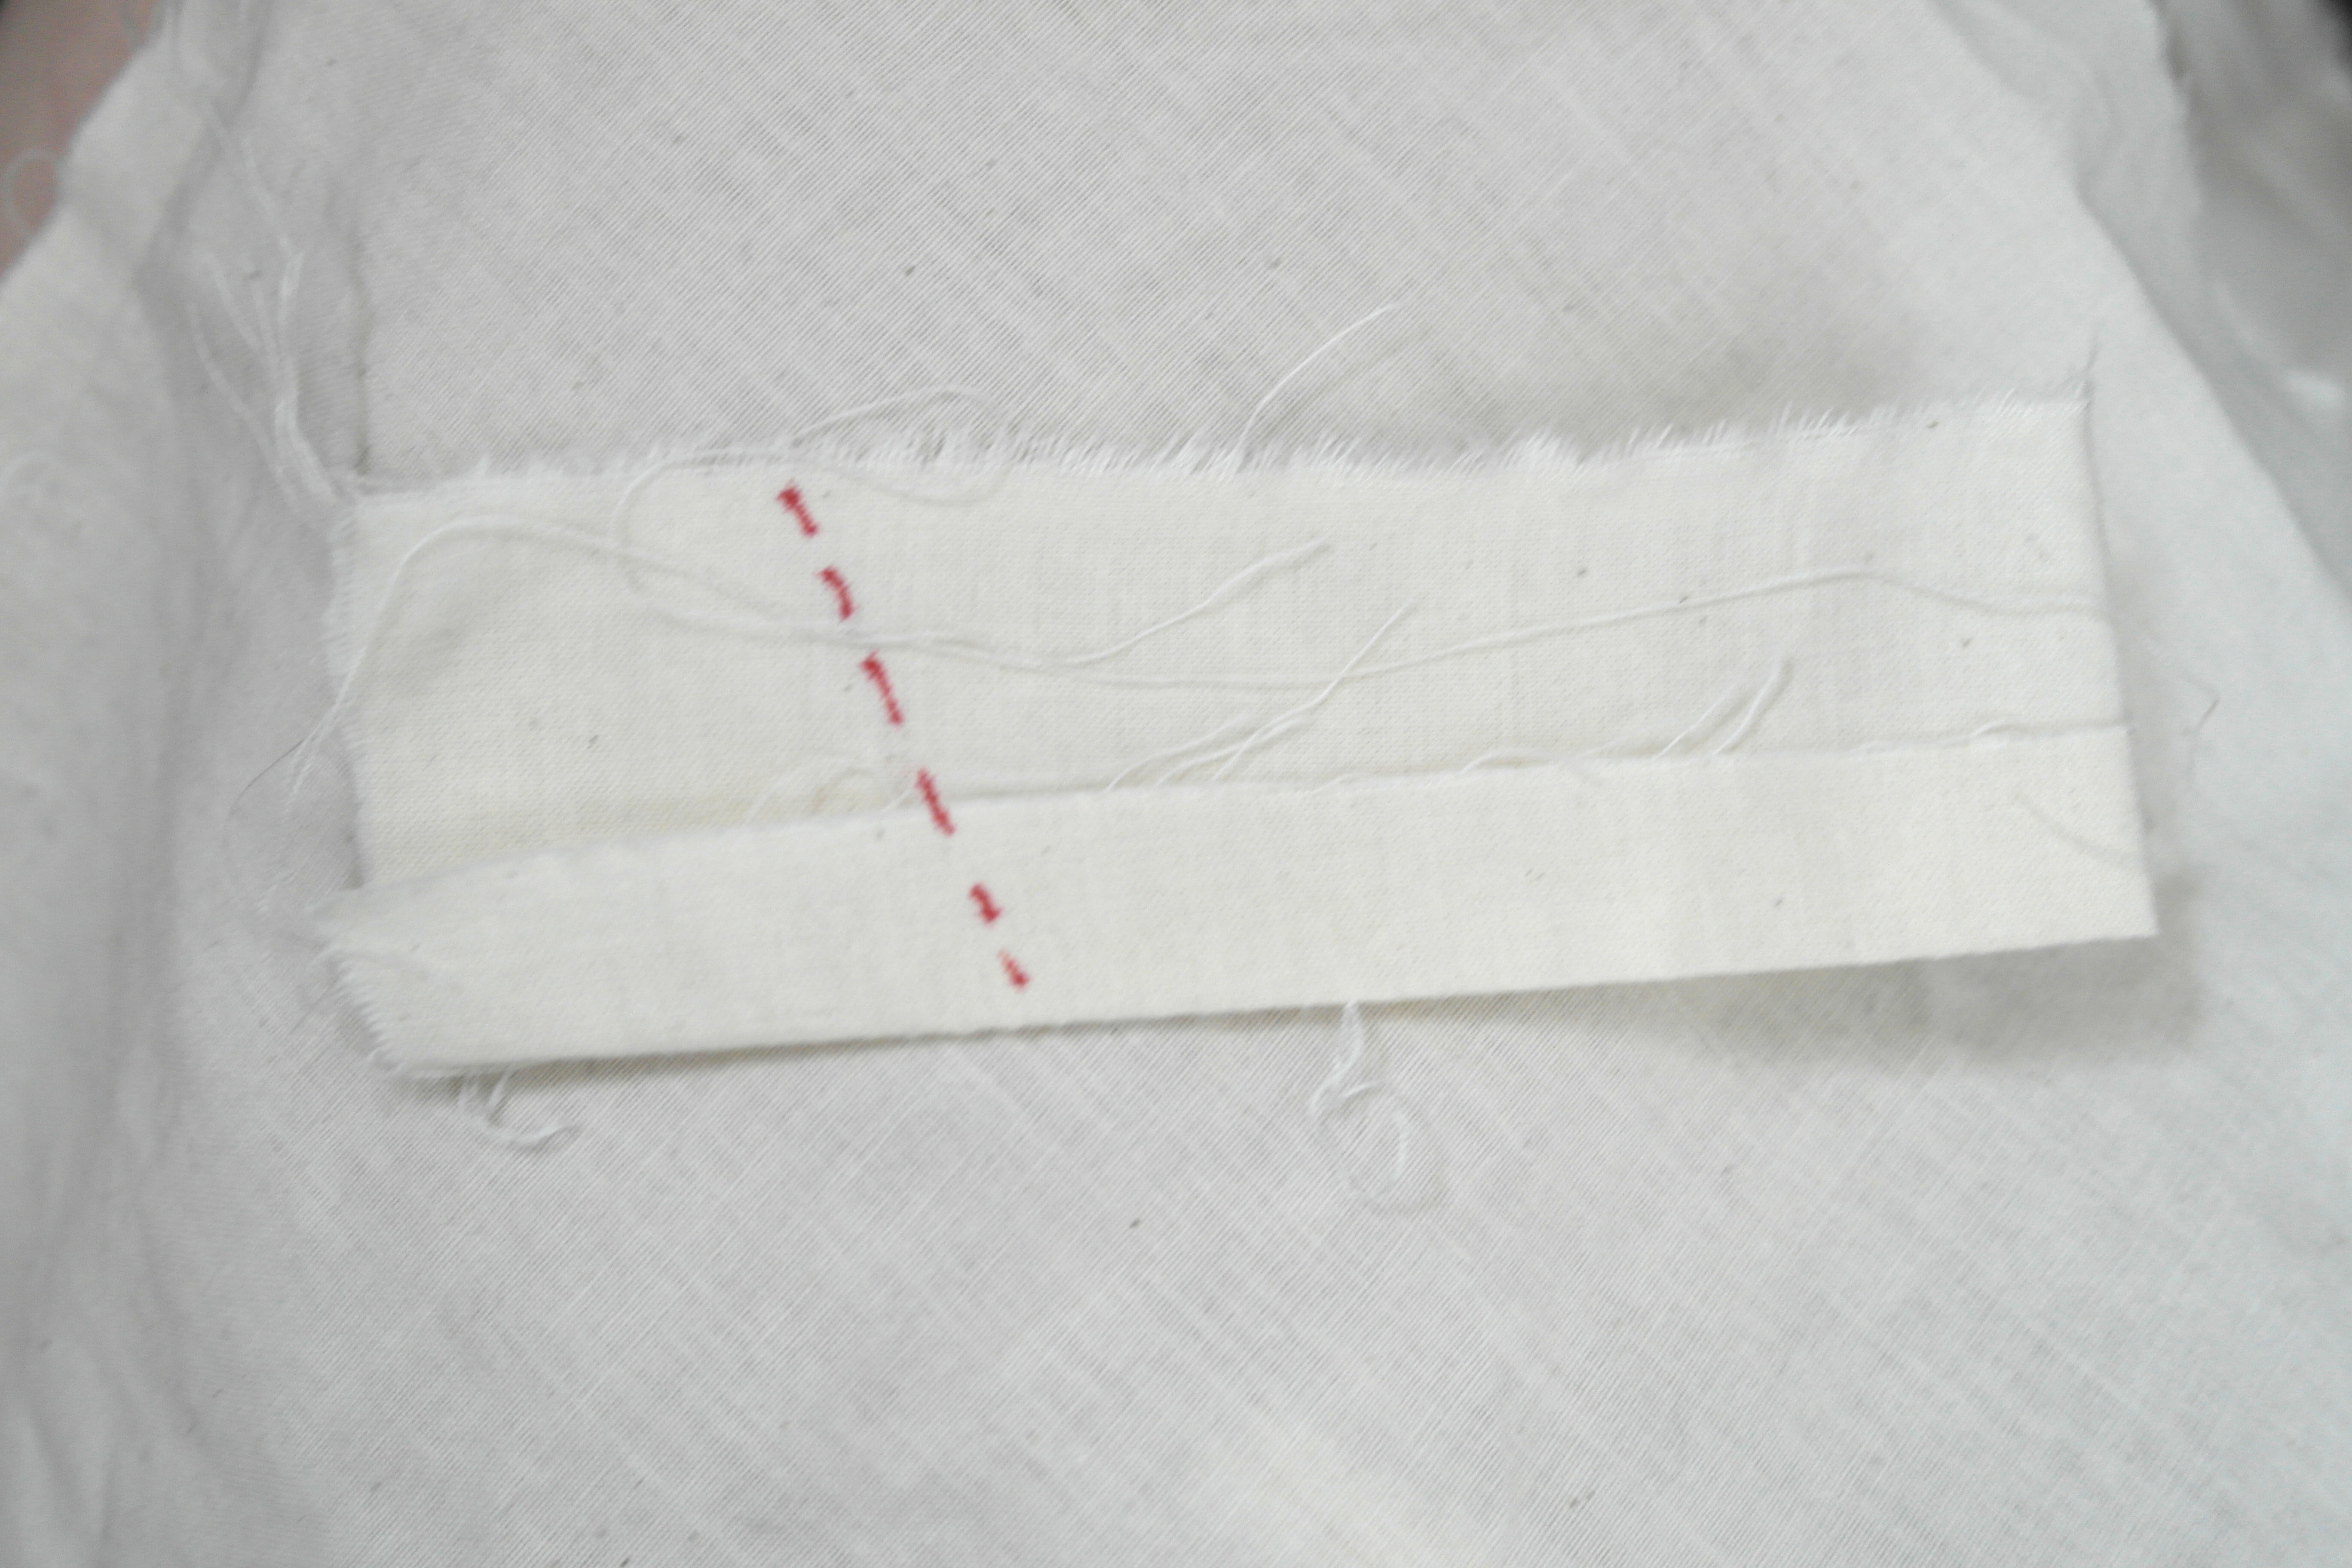 1. Measure your hand with the piece of thin fabric, mark it with the pen and sew on the reverse side.